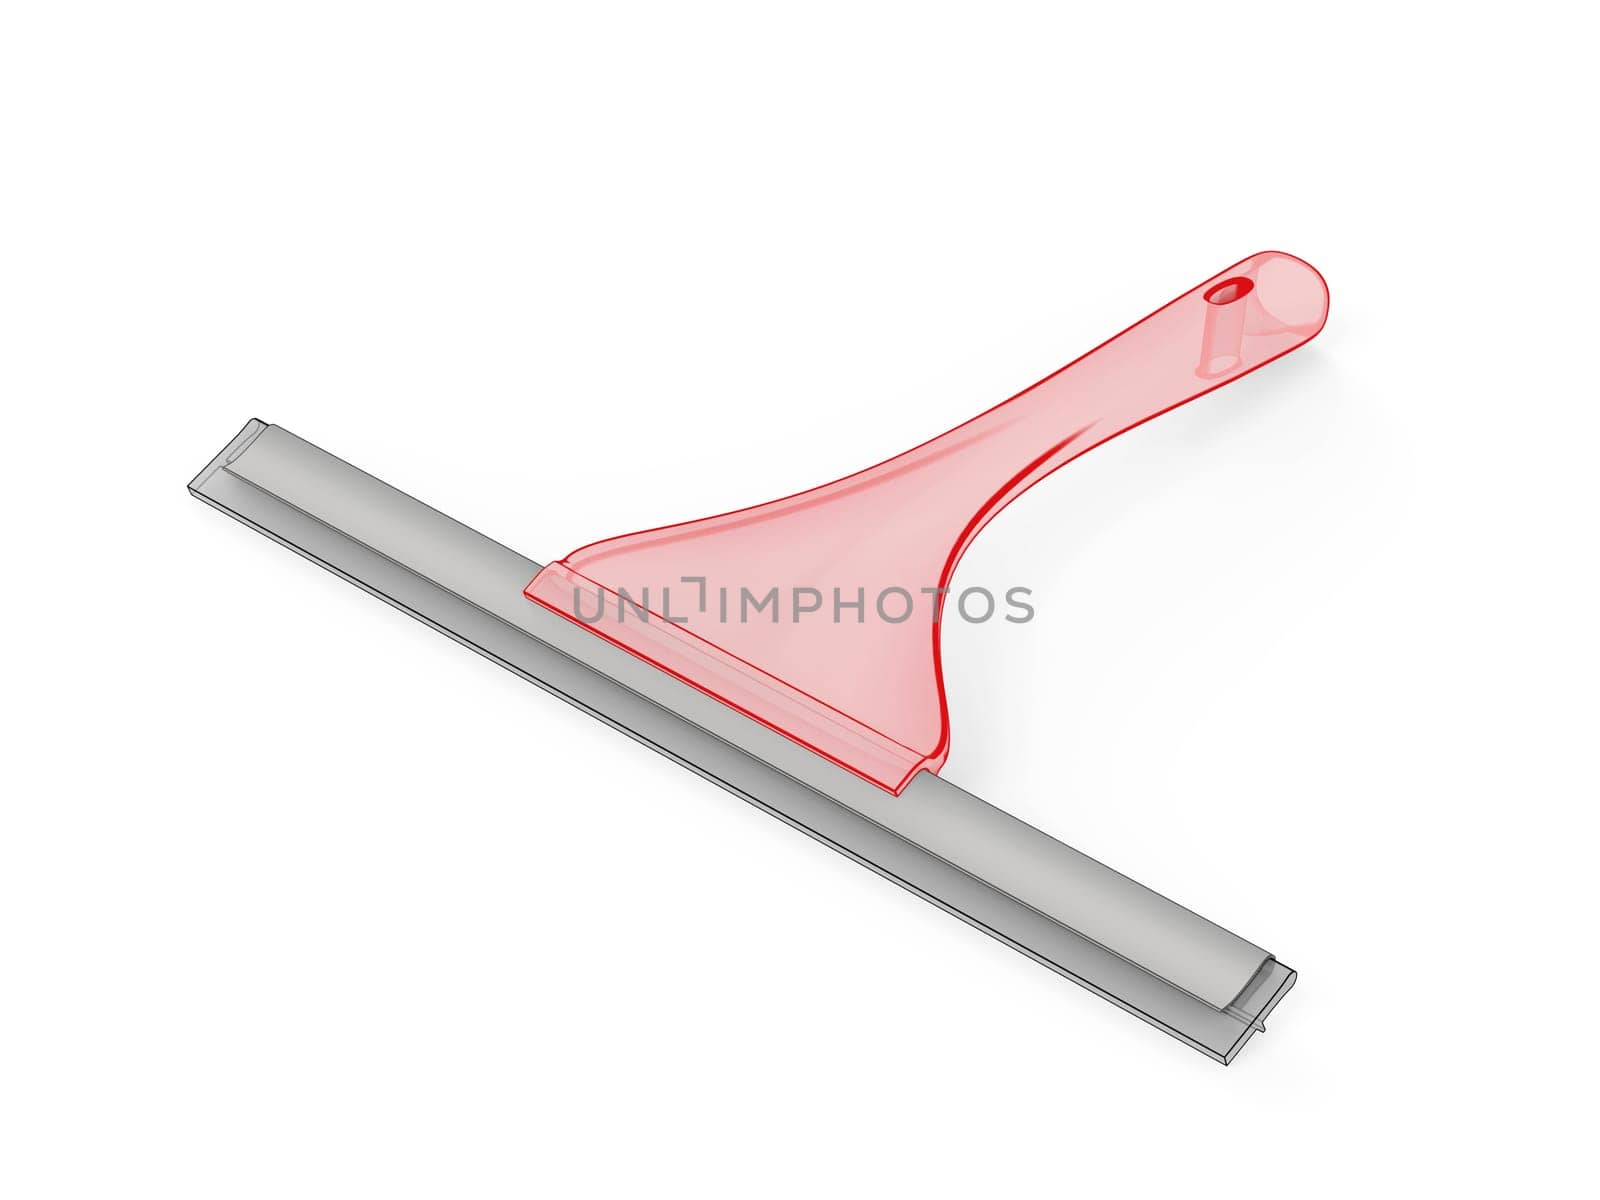 Sketch of window squeegee with red handle on a white background